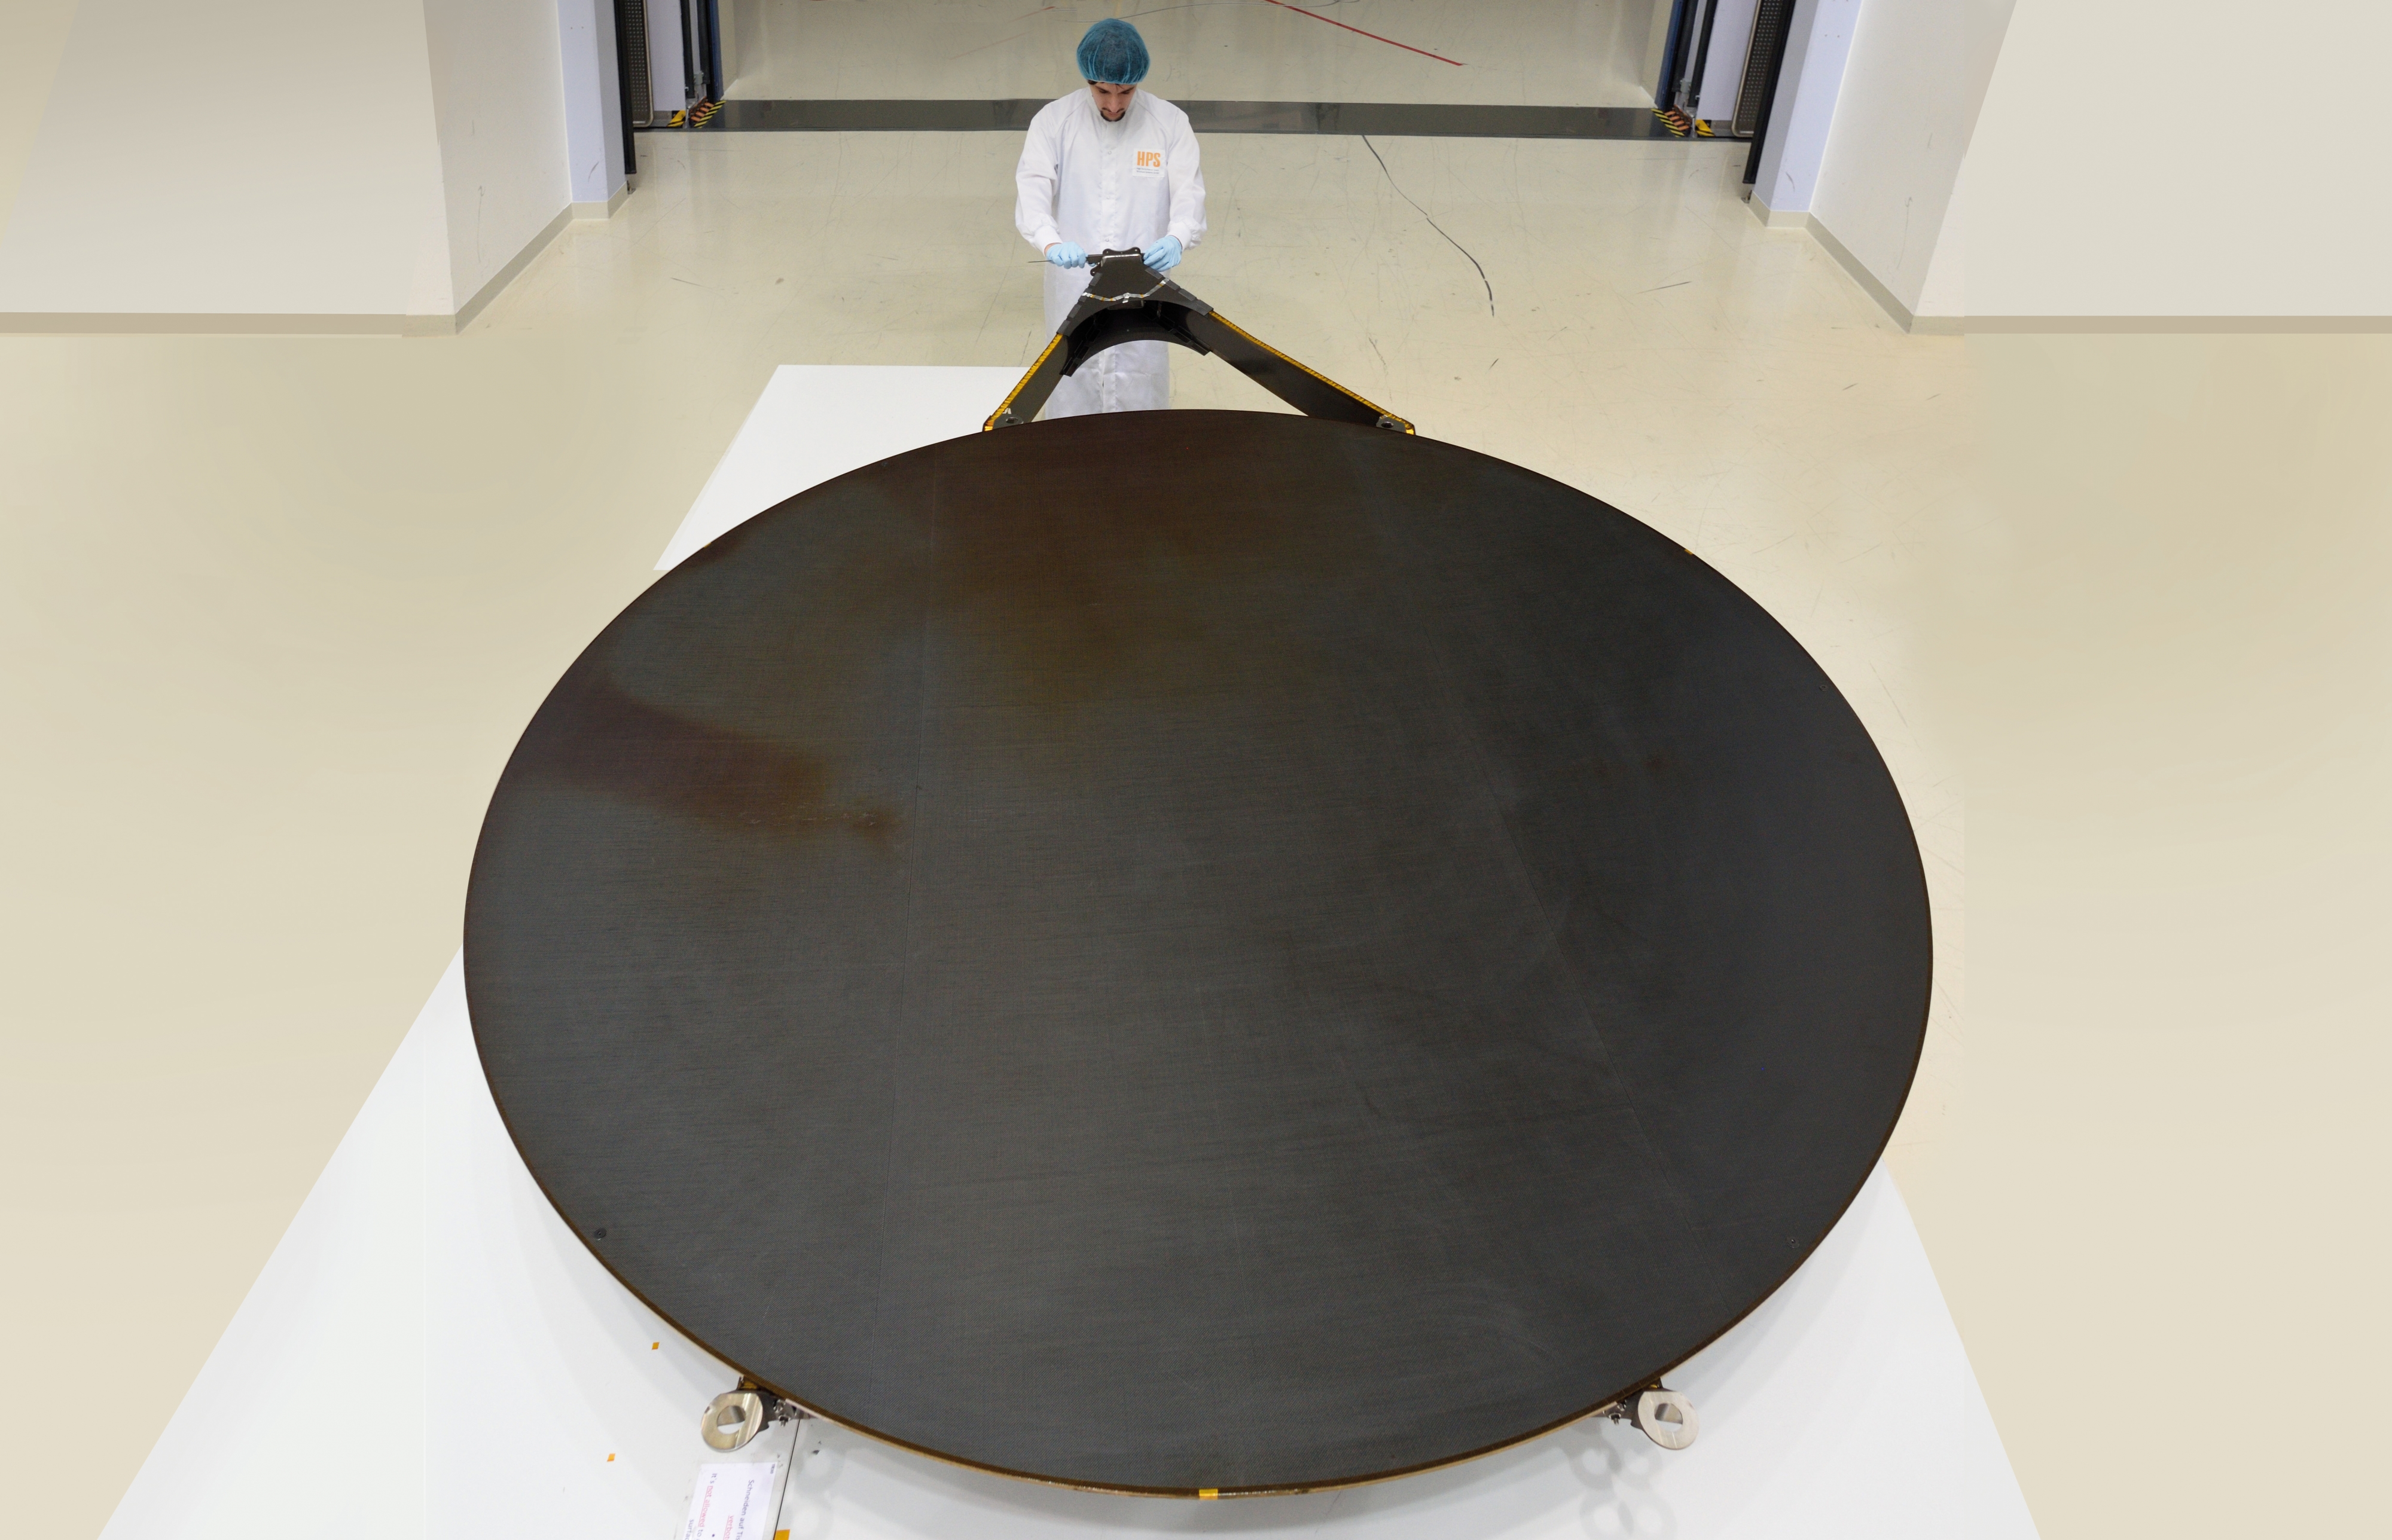 The 2.4 m Q-band reflector was developed, manufactured and successfully tested (vibration and acoustic loads, thermal vacuum cycling, thermo-elastic distortions and shape accuracy).  (Image credit: HPS GmbH)